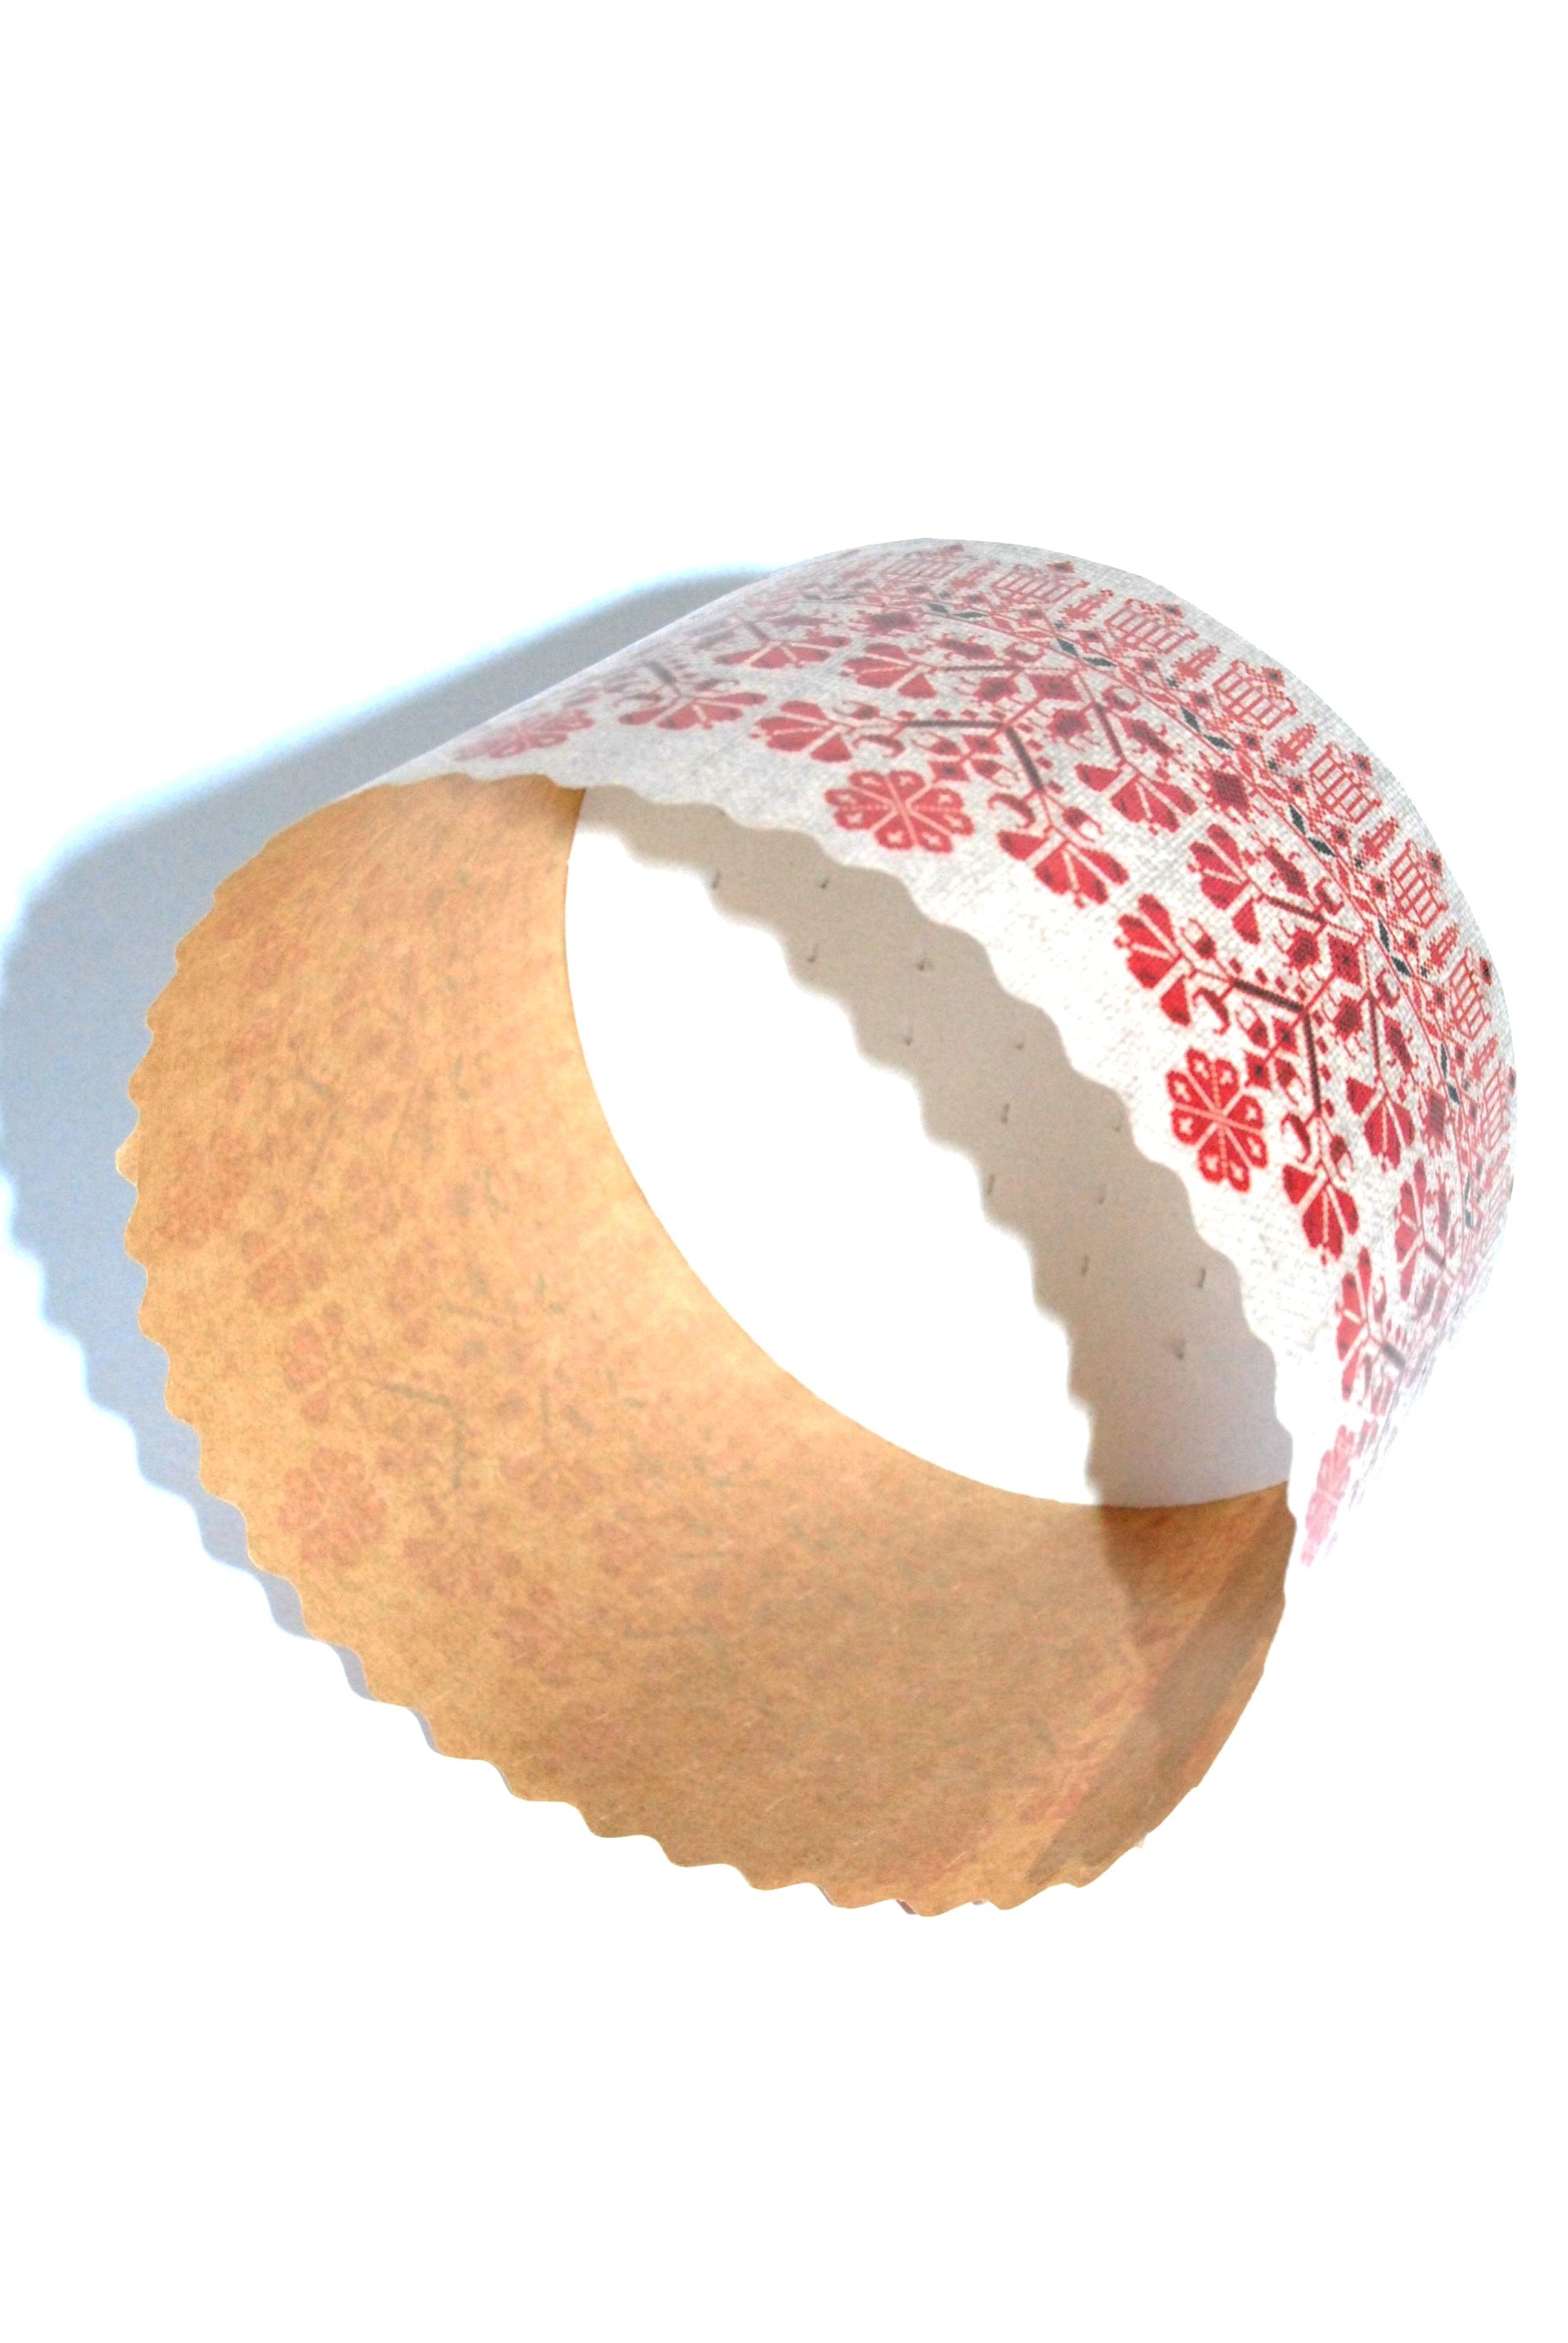 Easter bread baking paper form. Red